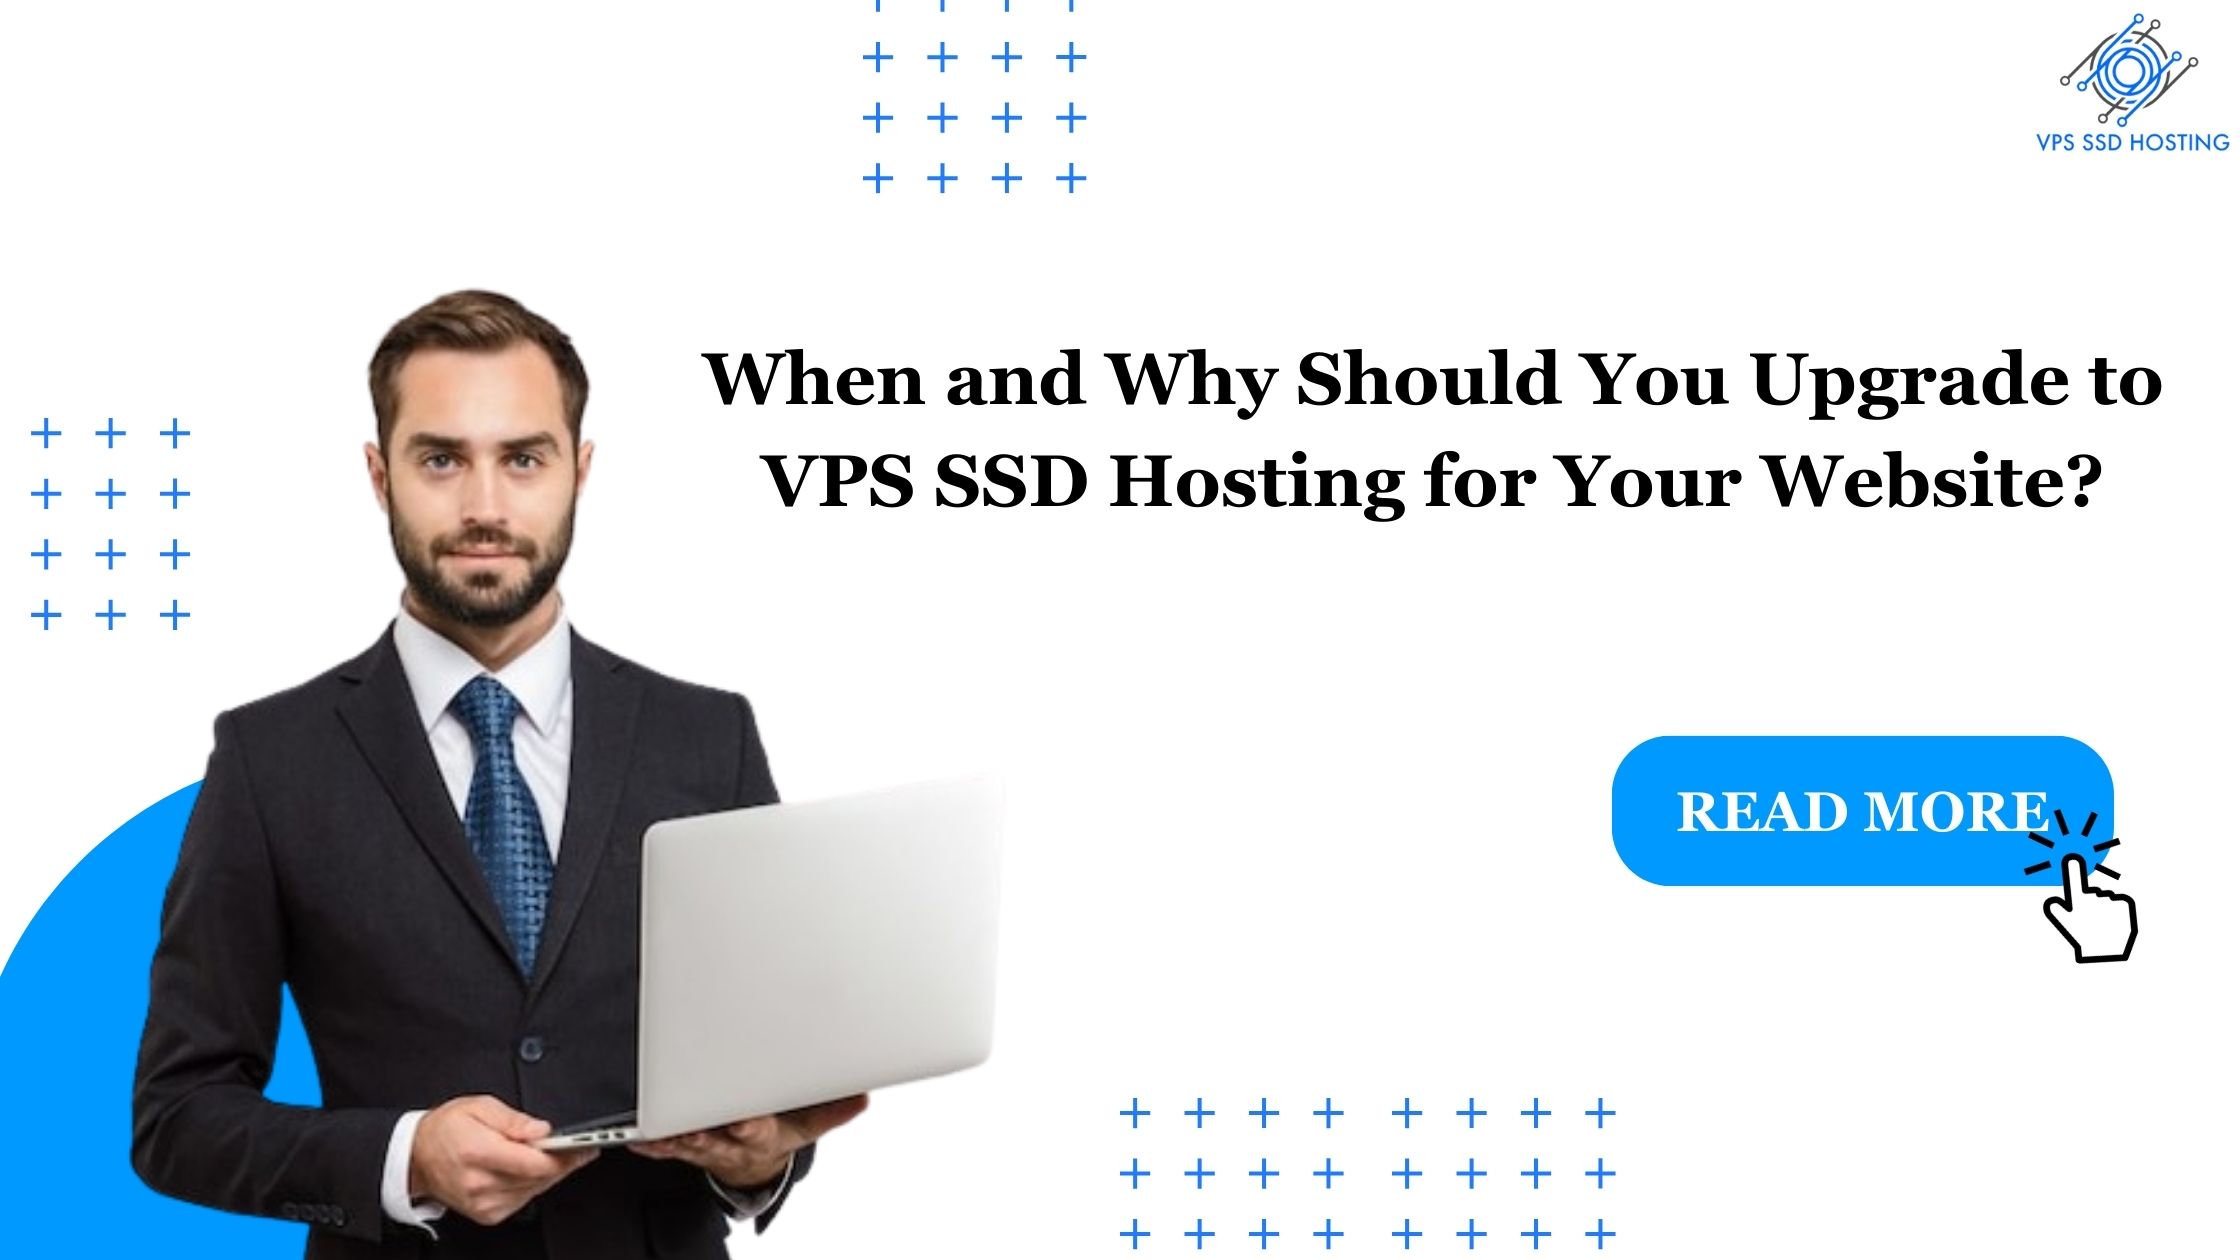 When and Why Should You Upgrade to VPS SSD Hosting for Your Website